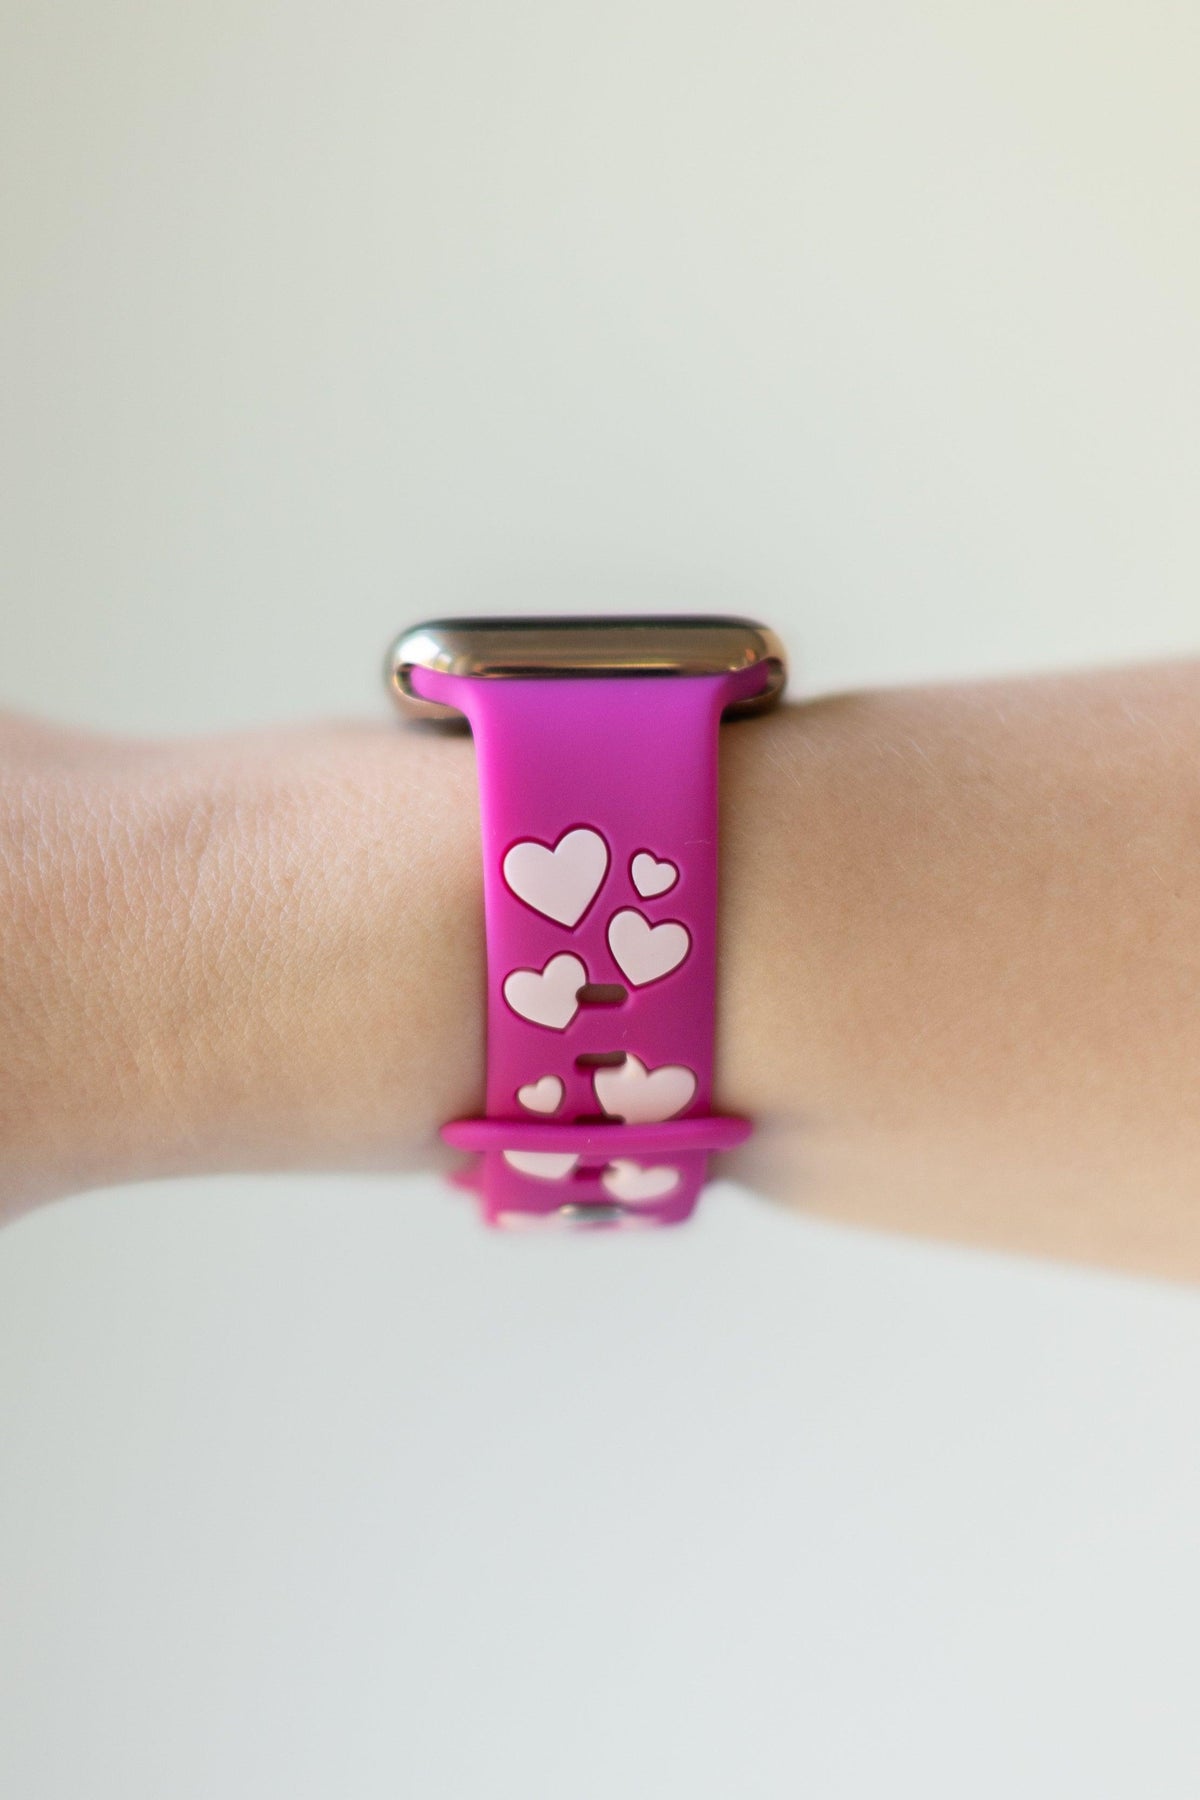 The Finest Fairy Apple Watch Band - Strawberry Avocados